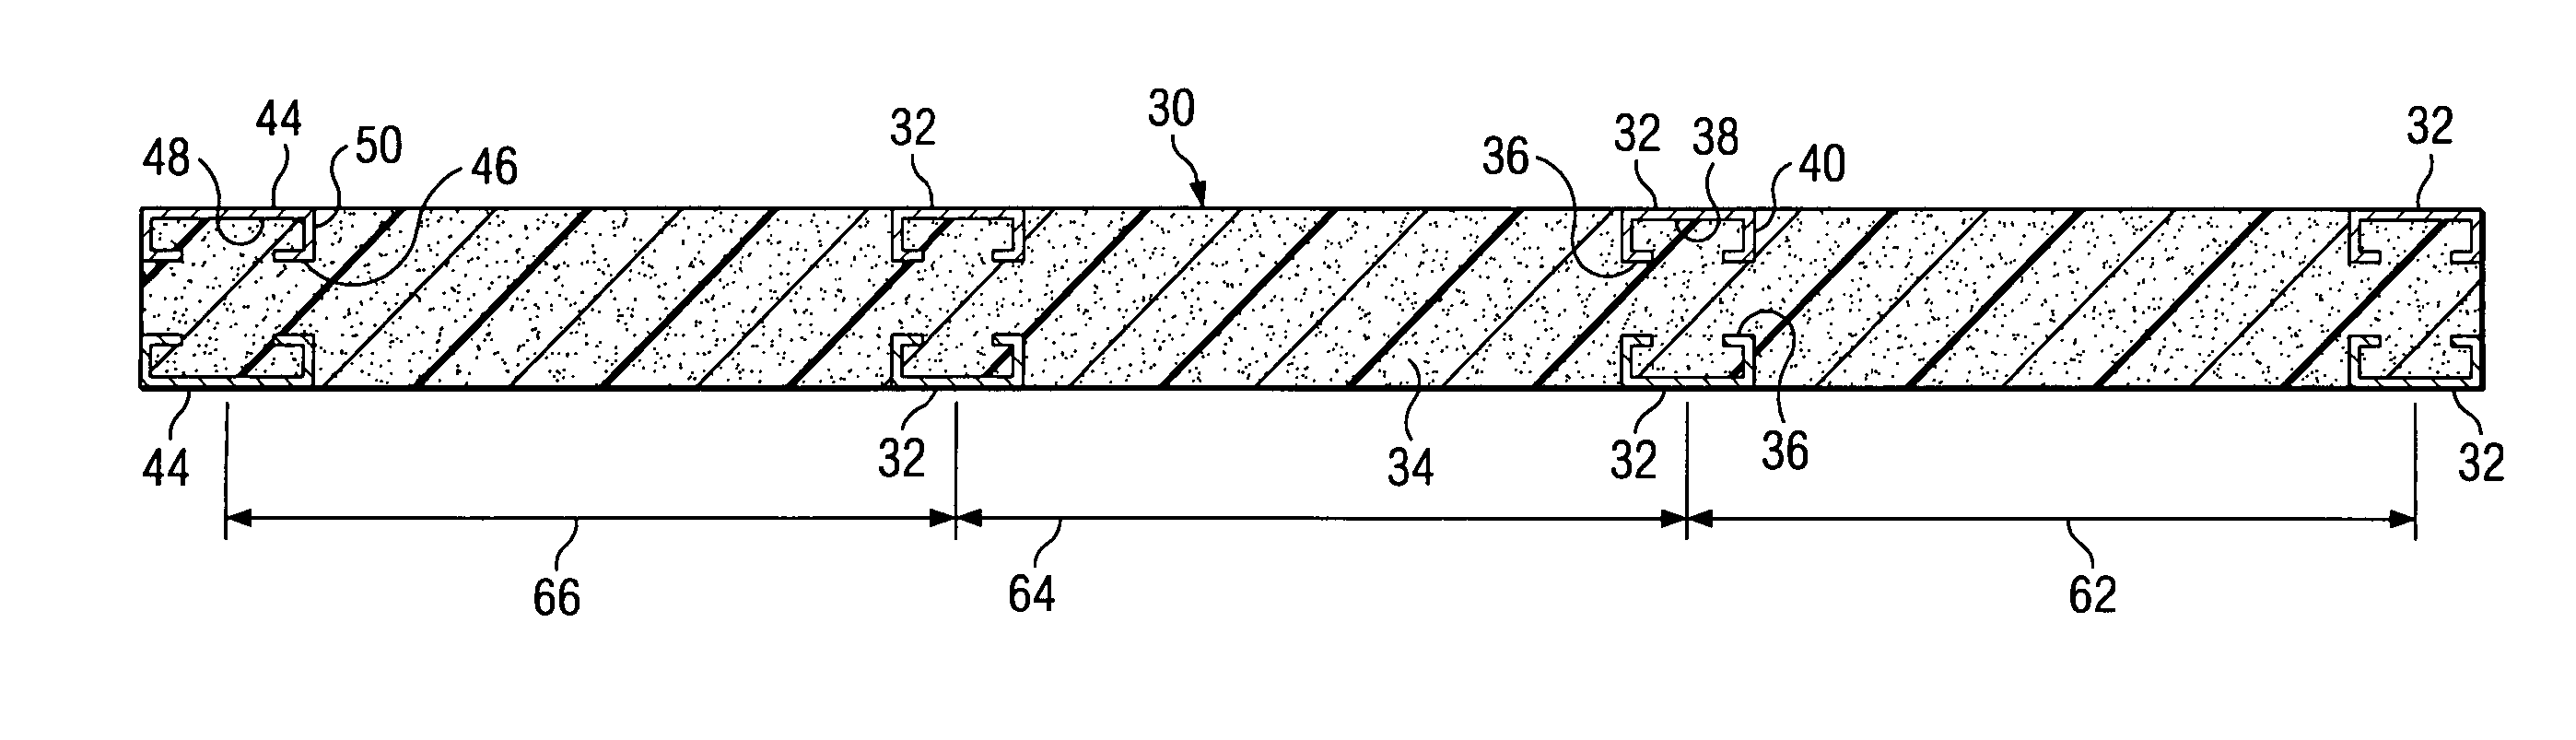 Insulated structural building panel and assembly system